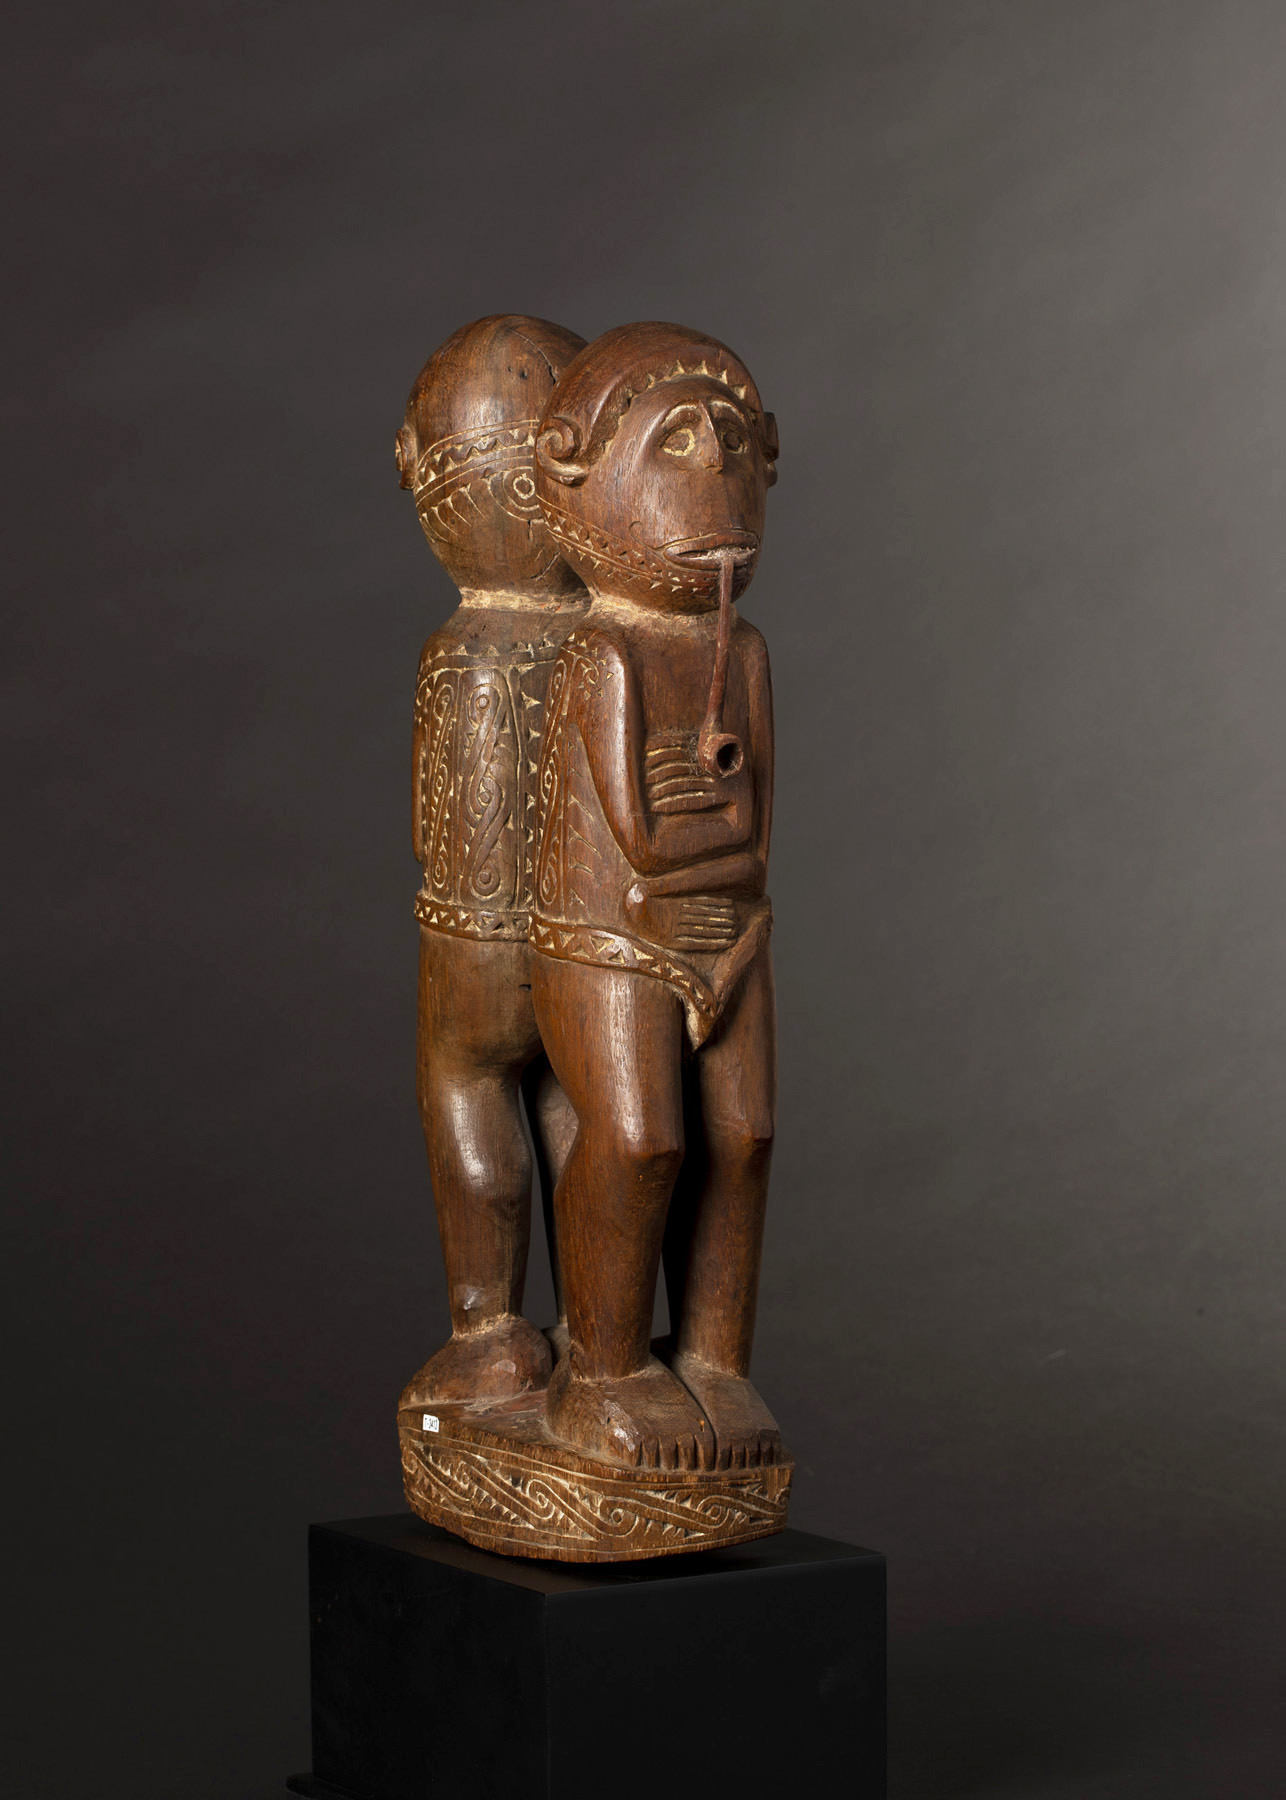 A Superb Old Massim Figure by Master Carver Banieva Milne Bay Province PNG 19th Century